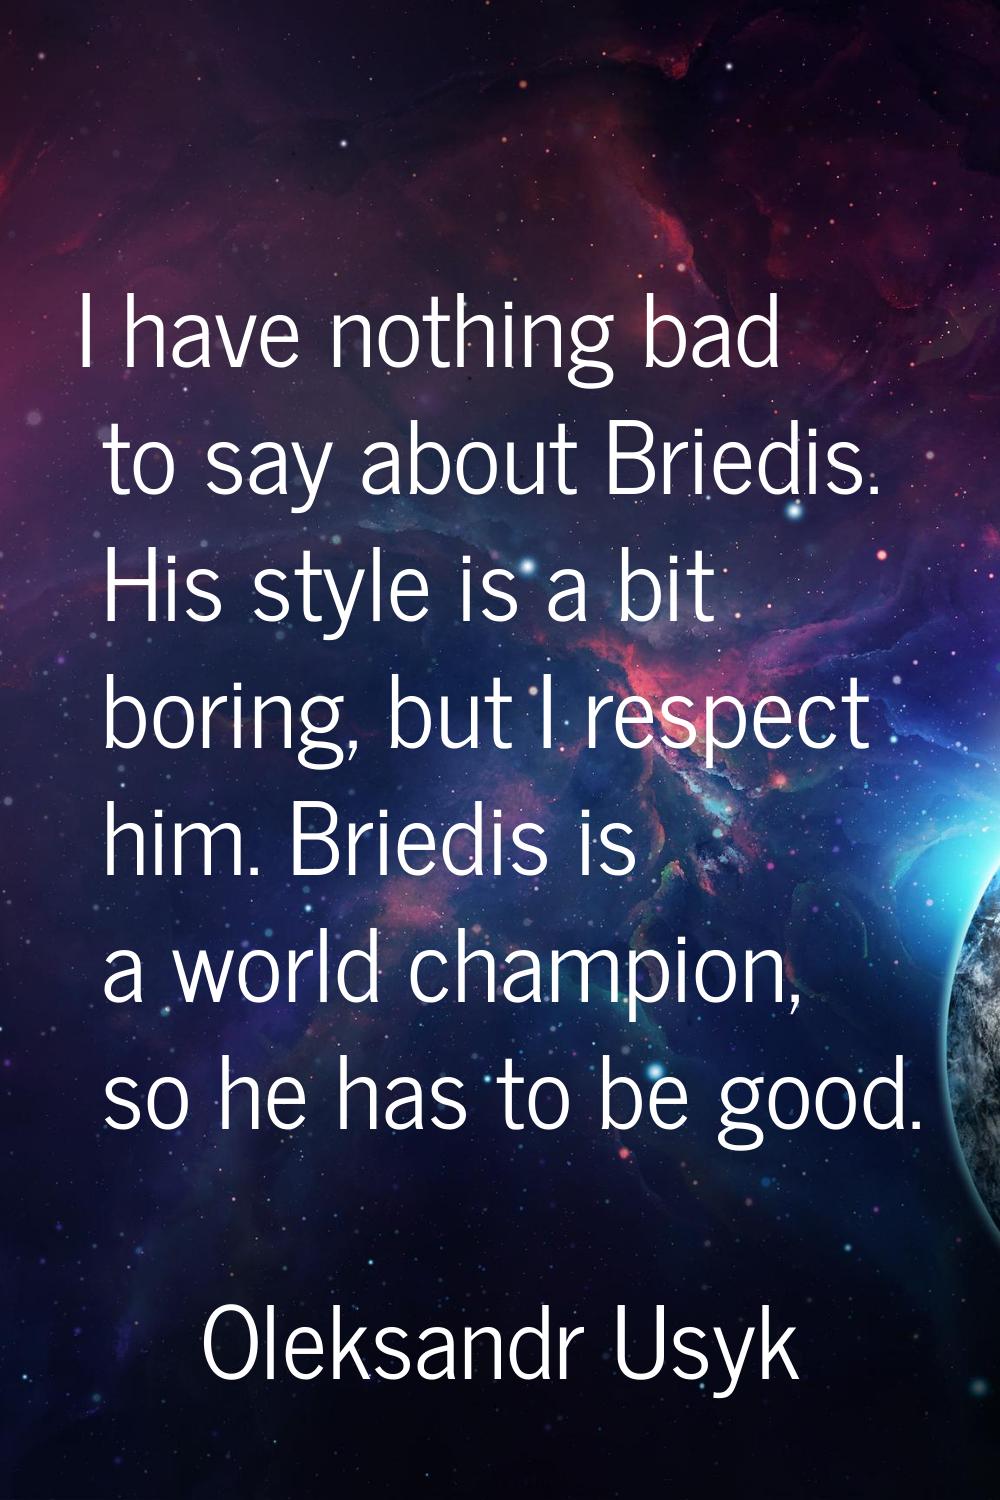 I have nothing bad to say about Briedis. His style is a bit boring, but I respect him. Briedis is a